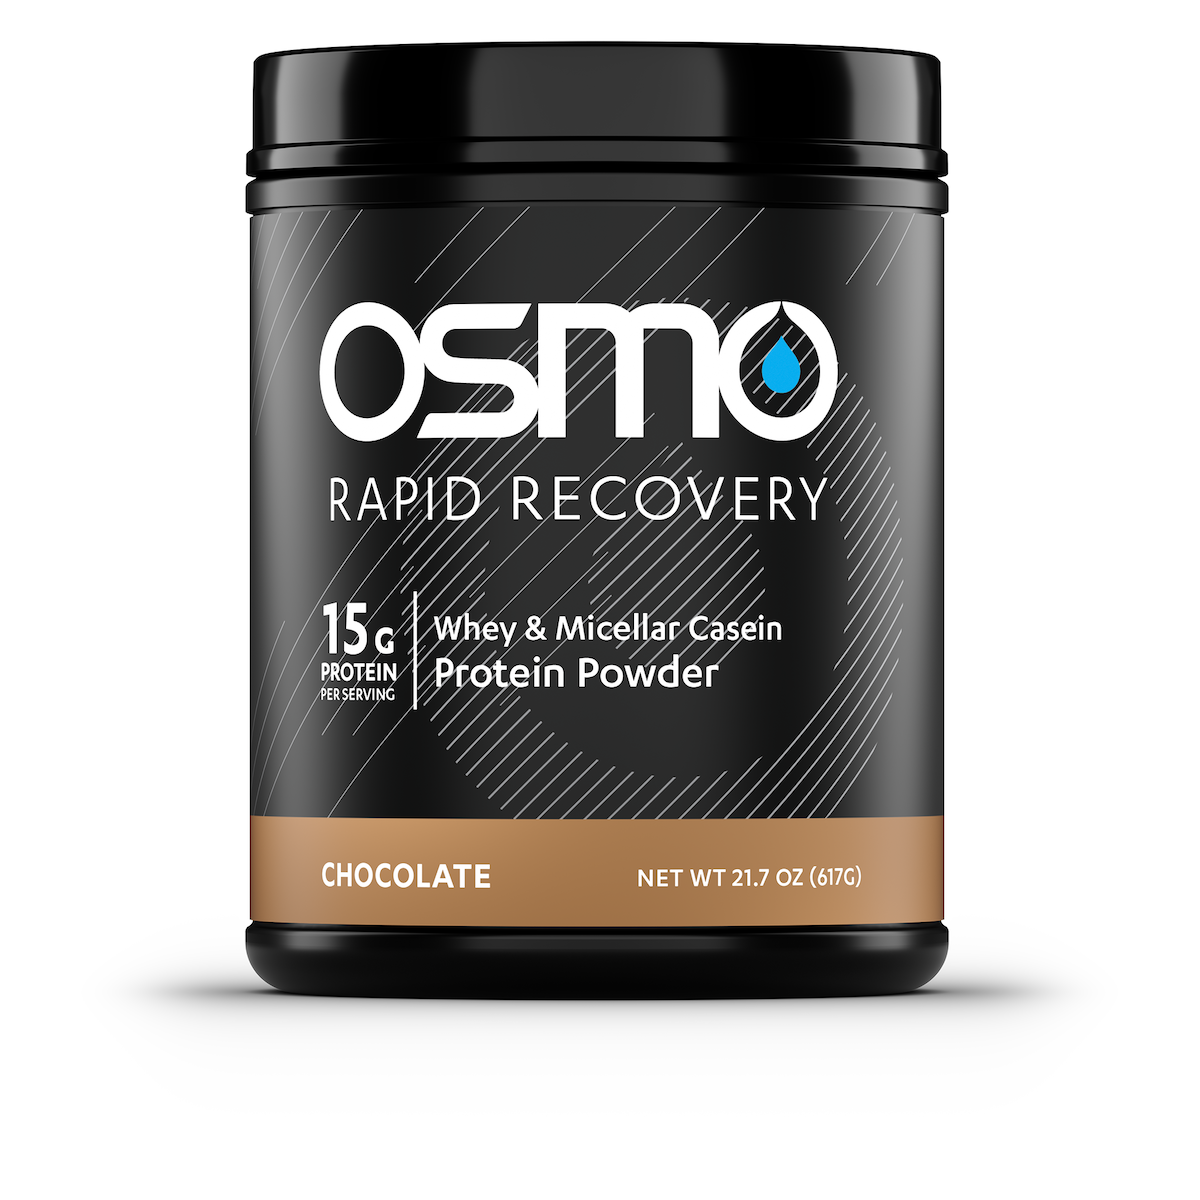 Osmo Rapid Recovery drink mix